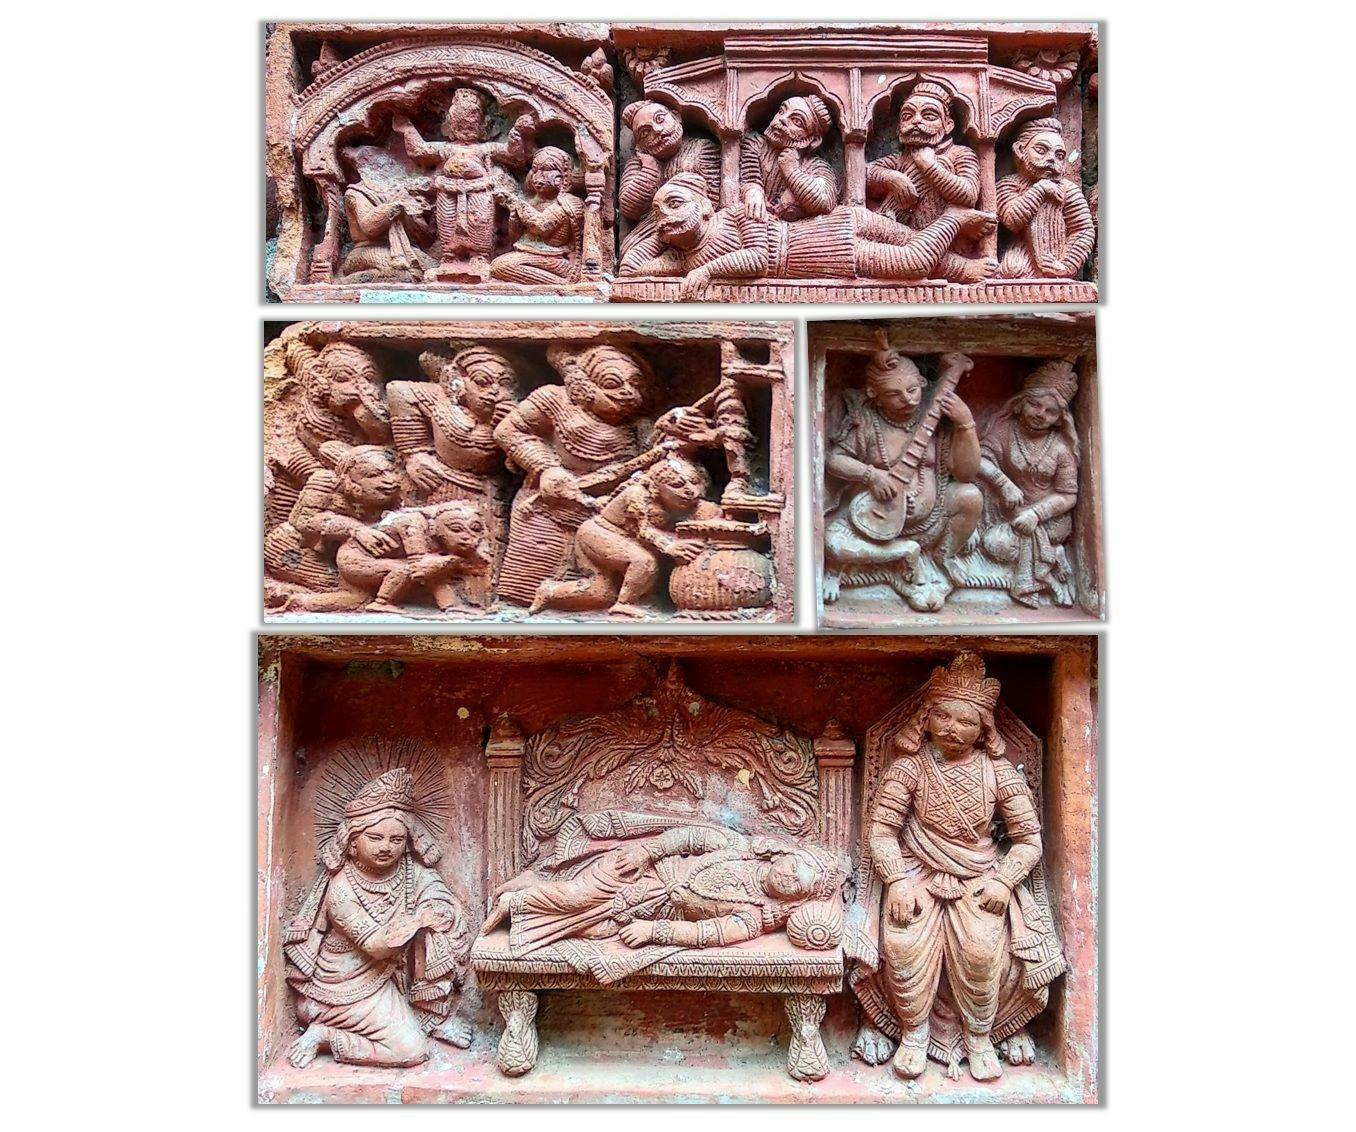 Exquisite terracotta plaques of Gopinath Temple depicting – (a) Devaki and Vasudeva prays to Lord Bishnu, (b) Child Krishna stealing butter, (c) Lord Siva playing veena seated upon a tiger skin, (d) Arjuna is sitting near the feet of a sleeping Krishna while Durjodhan sits above